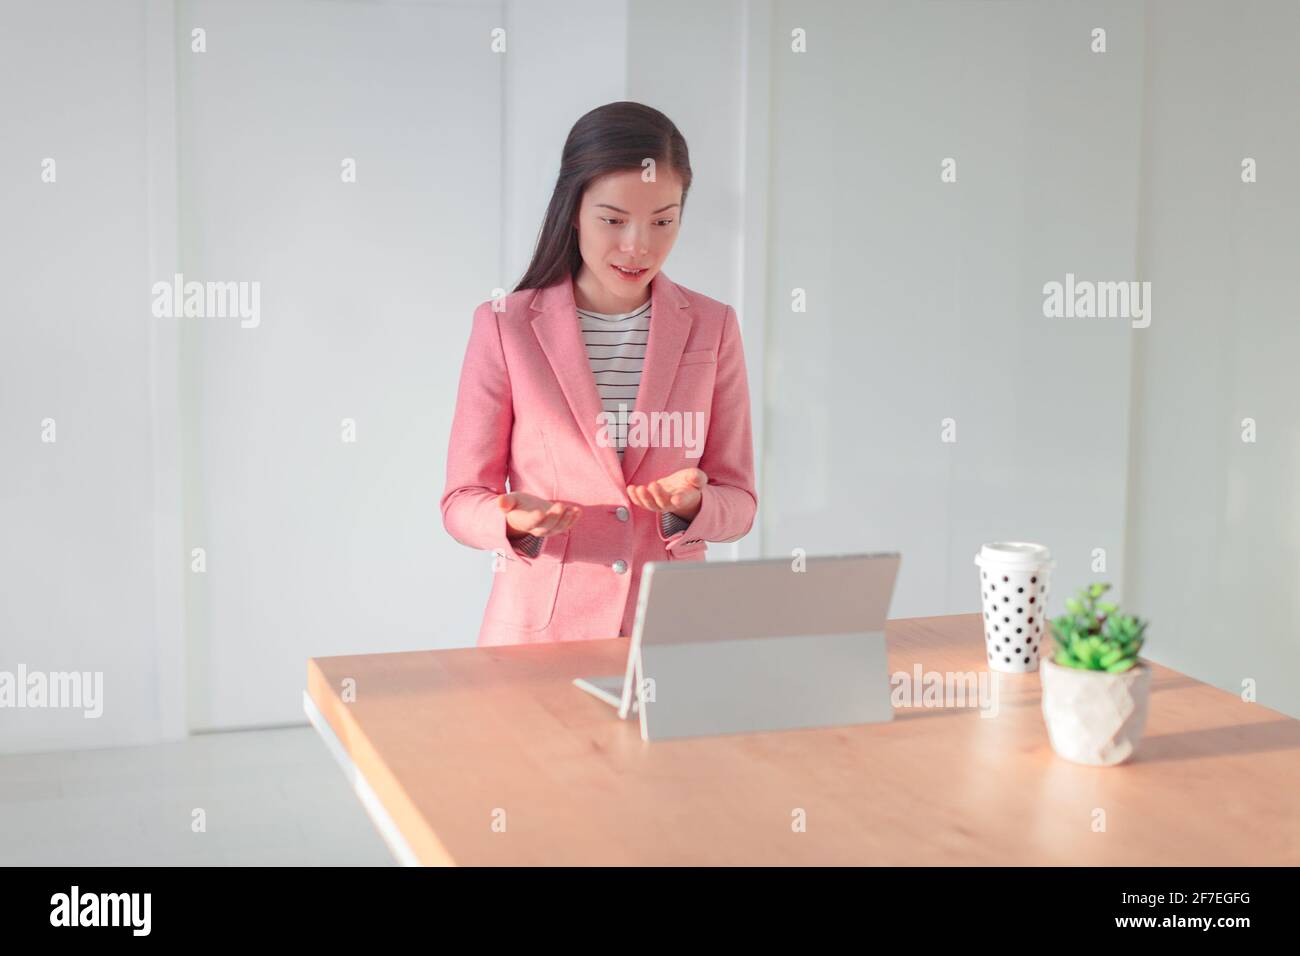 Videoconference online presentation Asian business woman talking teaching live webinar from home office streaming from laptop on standing desk Stock Photo